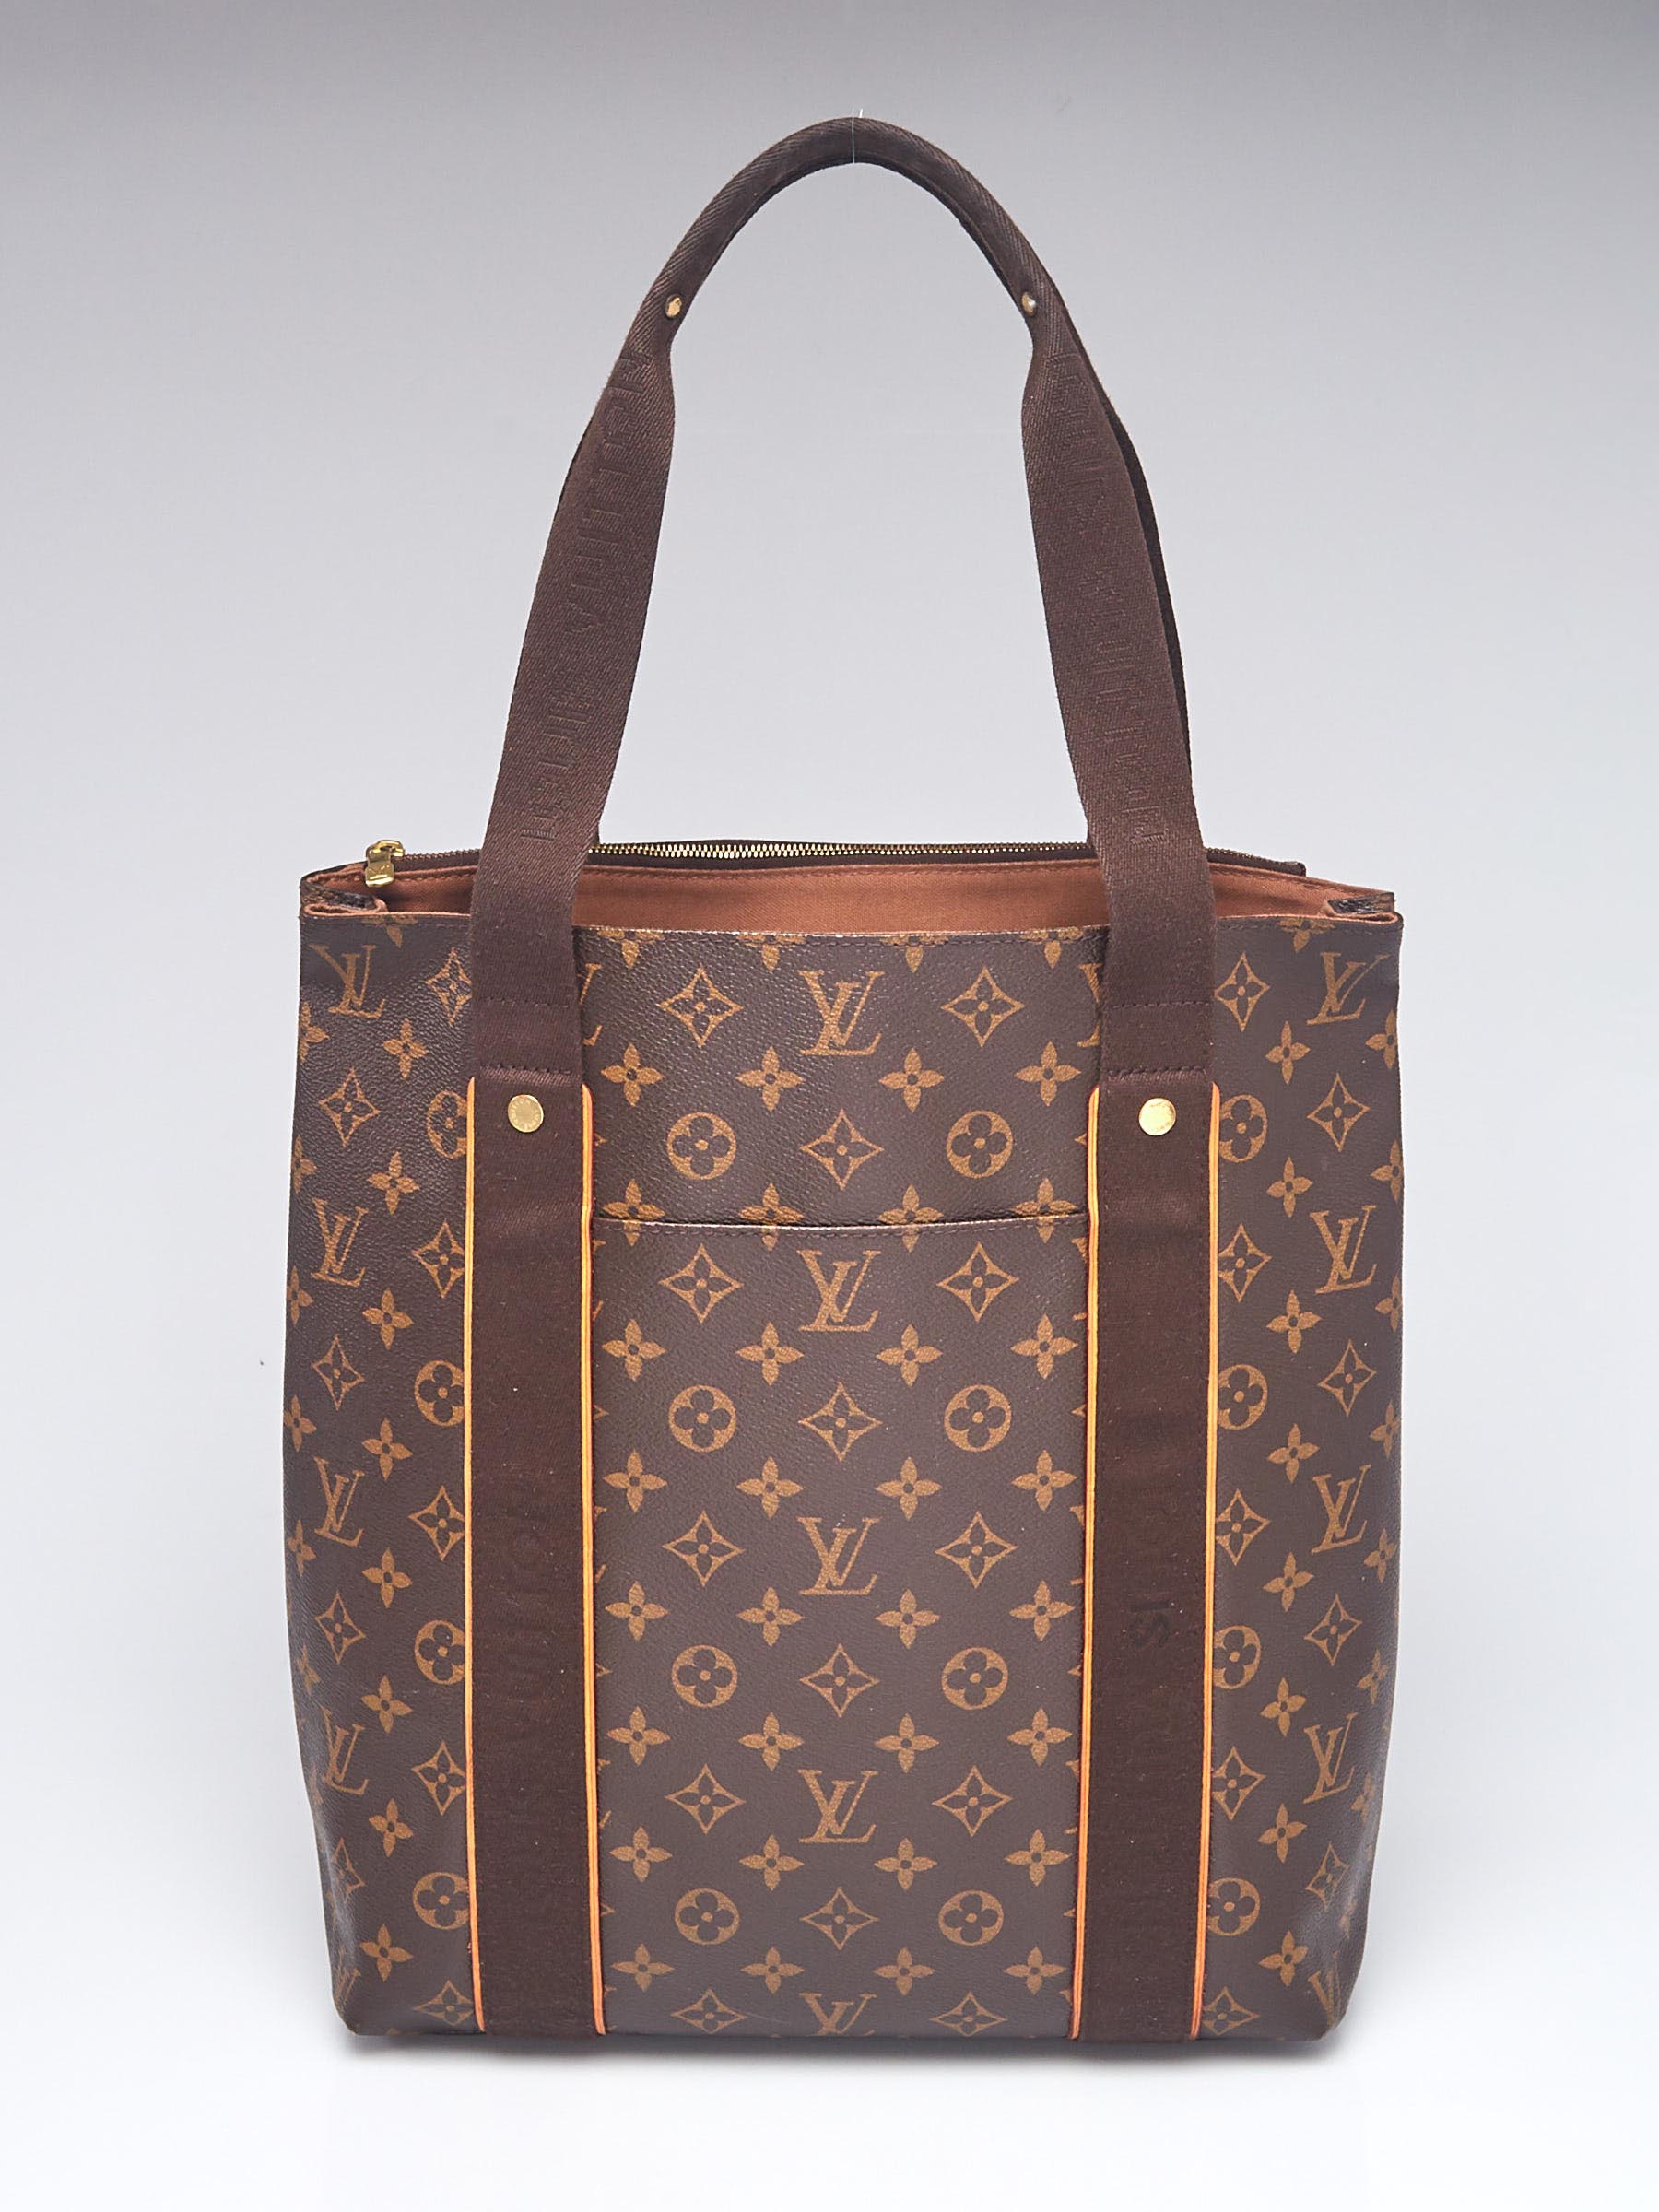 Louis Vuitton - Tote Bags, Authentic Used Bags & Handbags